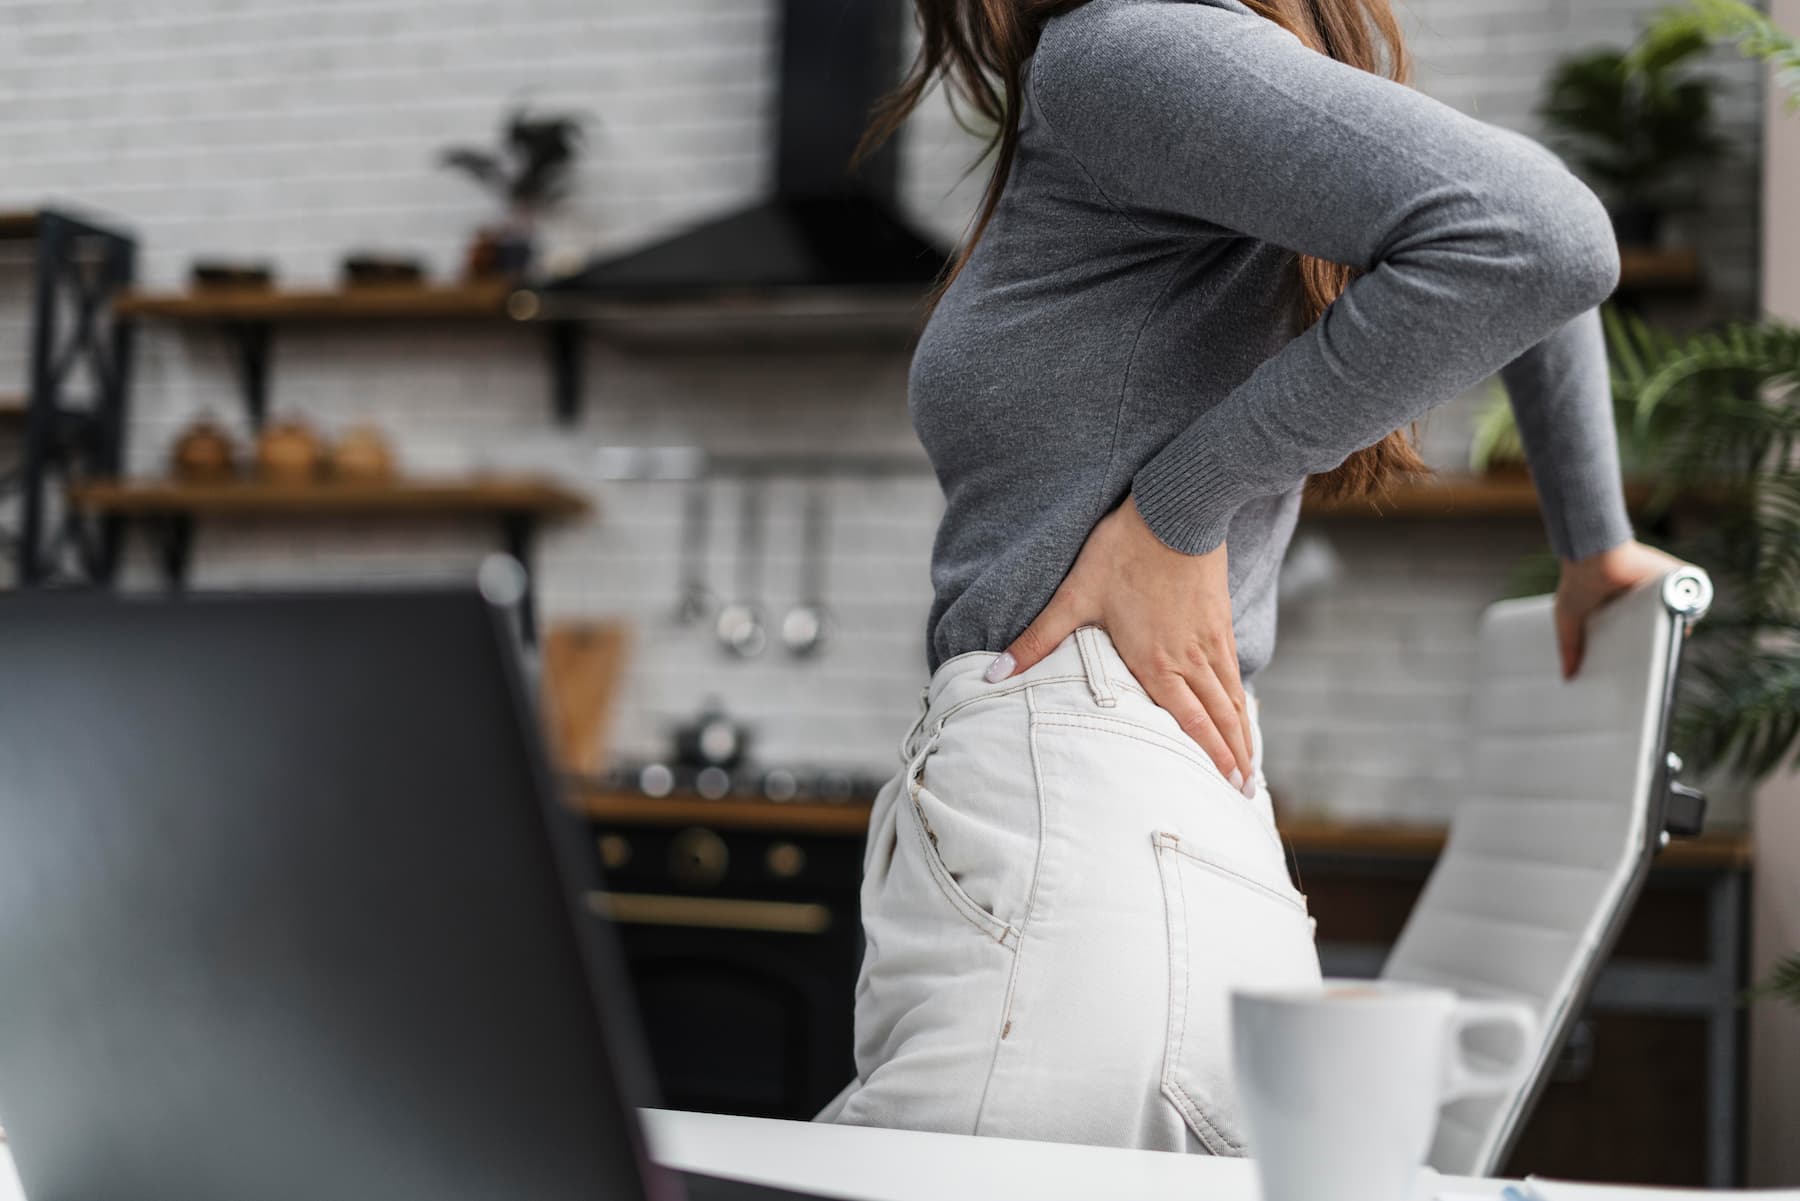 Hip pain: symptoms, causes, what drugs will work?